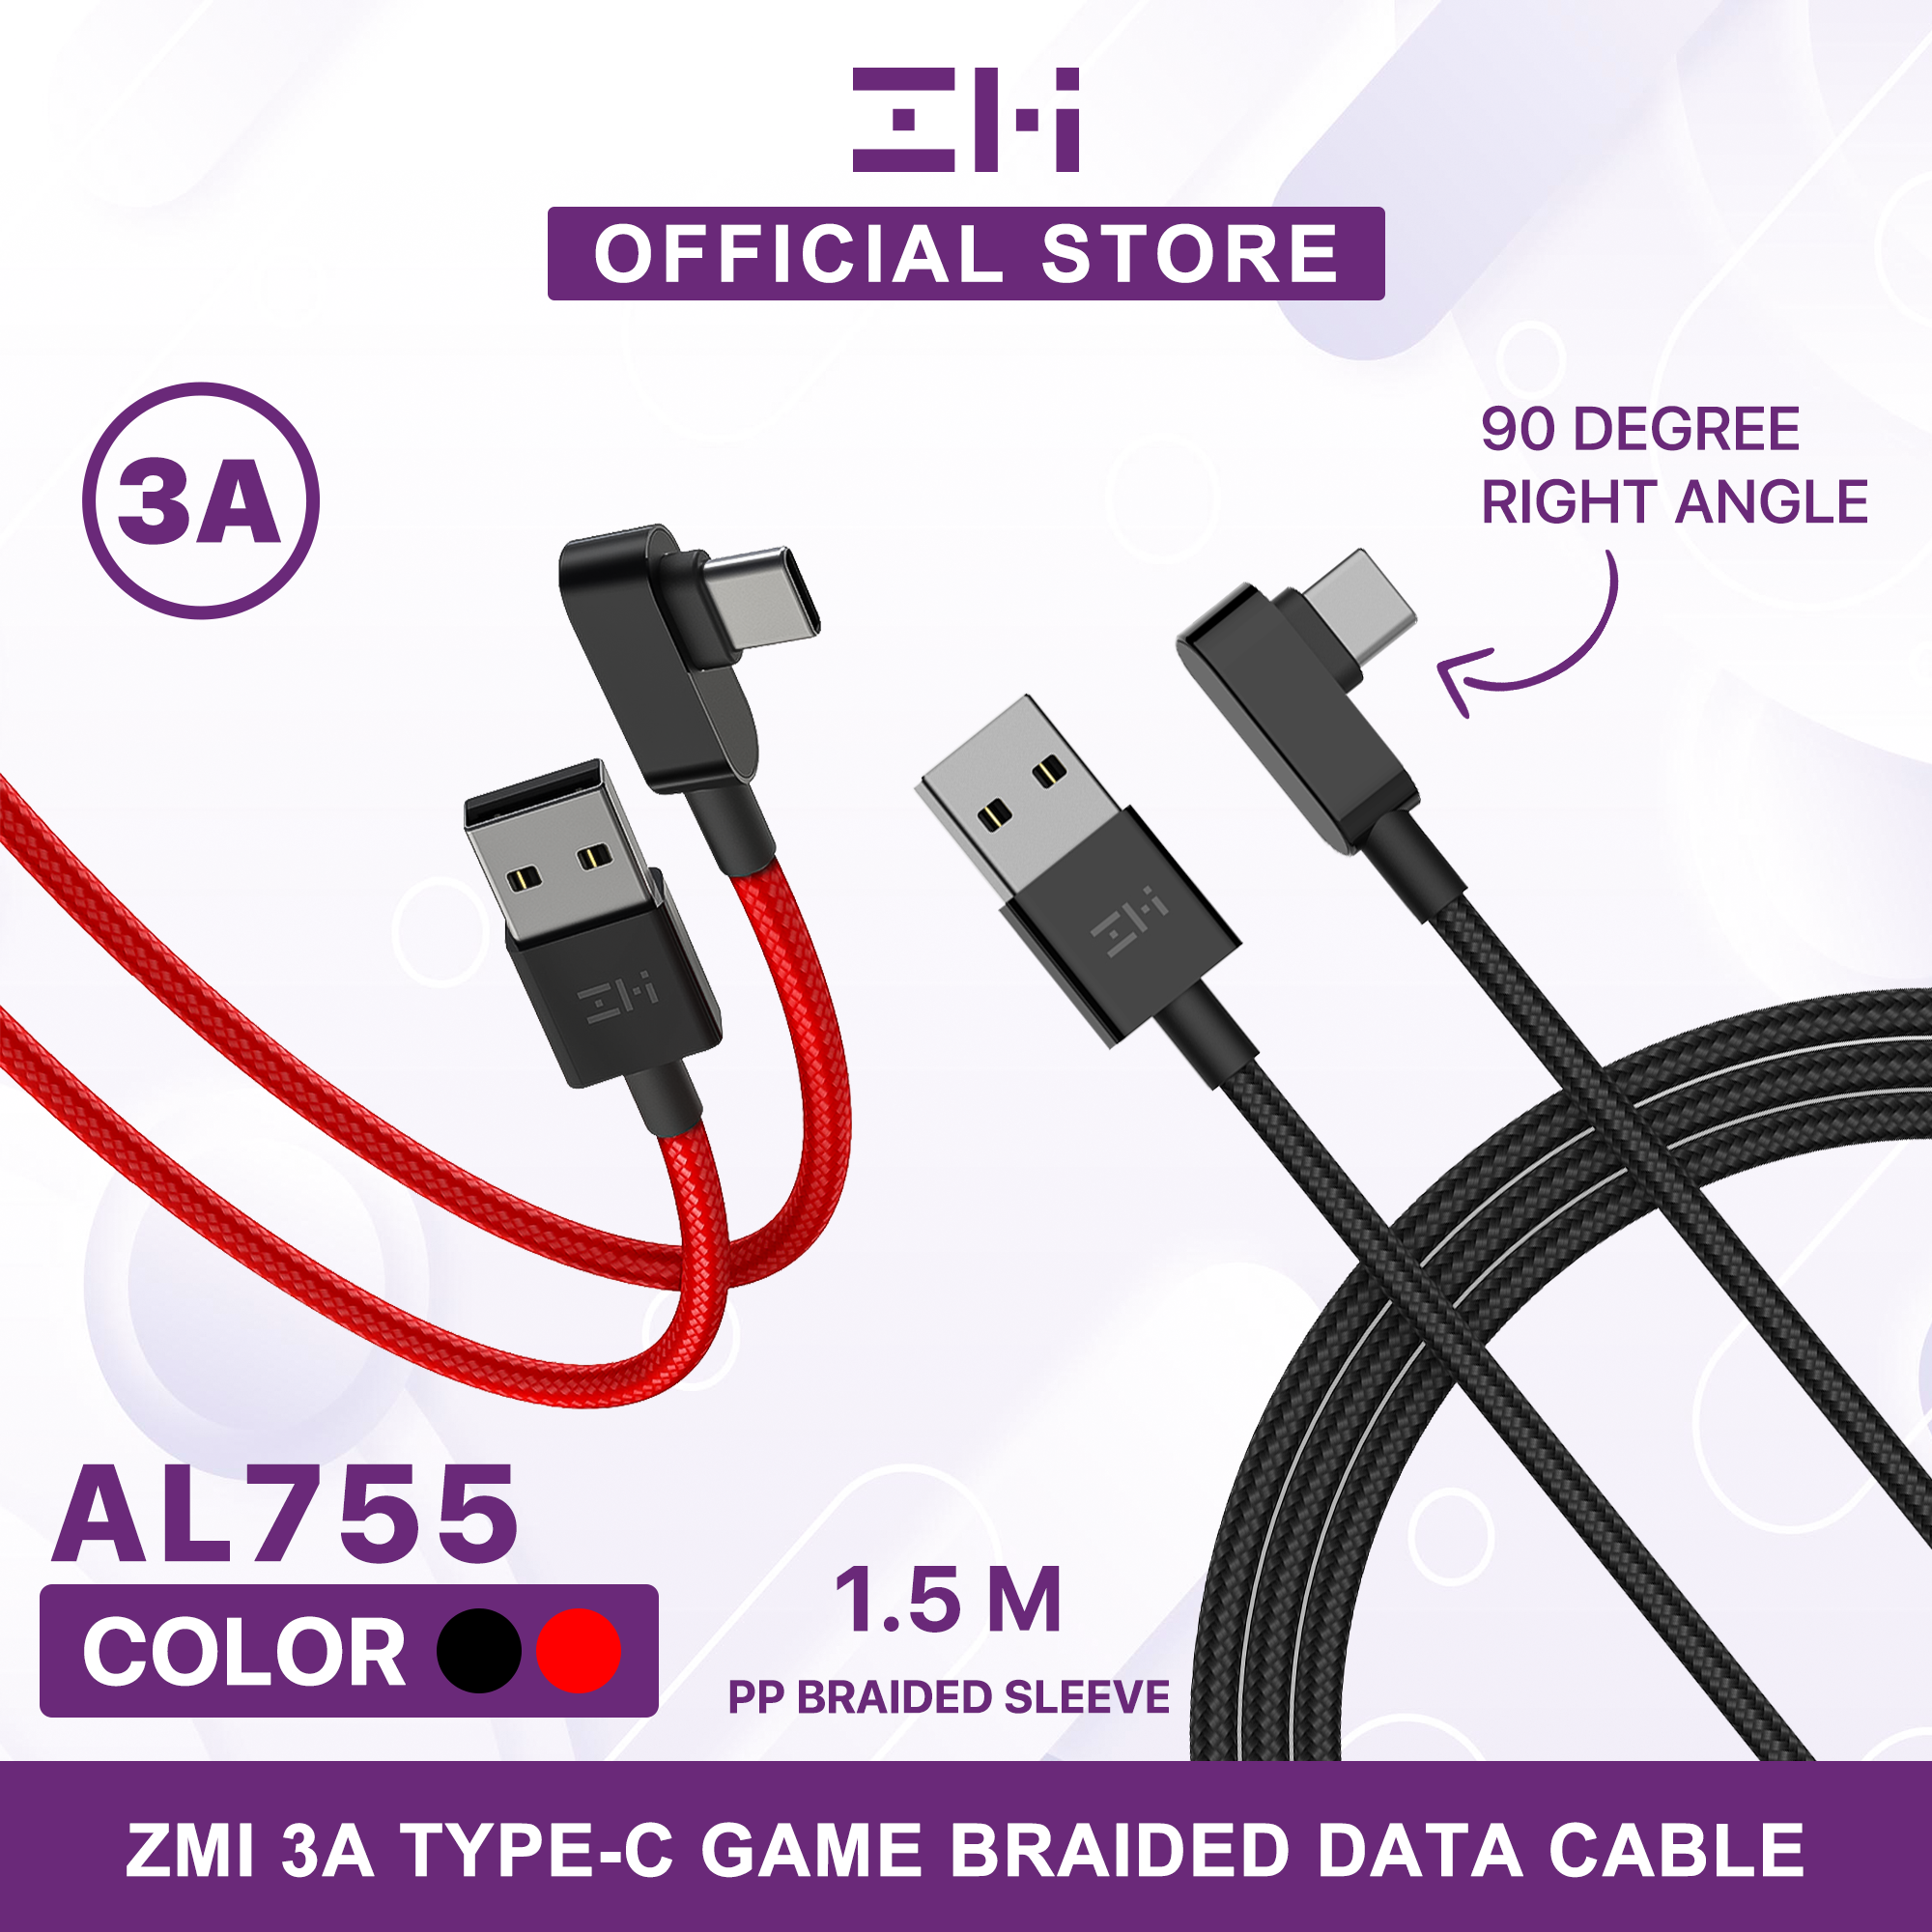 ZMI AL755 USB-A to USB-C CABLE 3A FAST CHARGING TYPE-C BRAIDED CABLE FOR PLAYING GAME 1.5M, Gaming Cable, Type C cable - BLACK